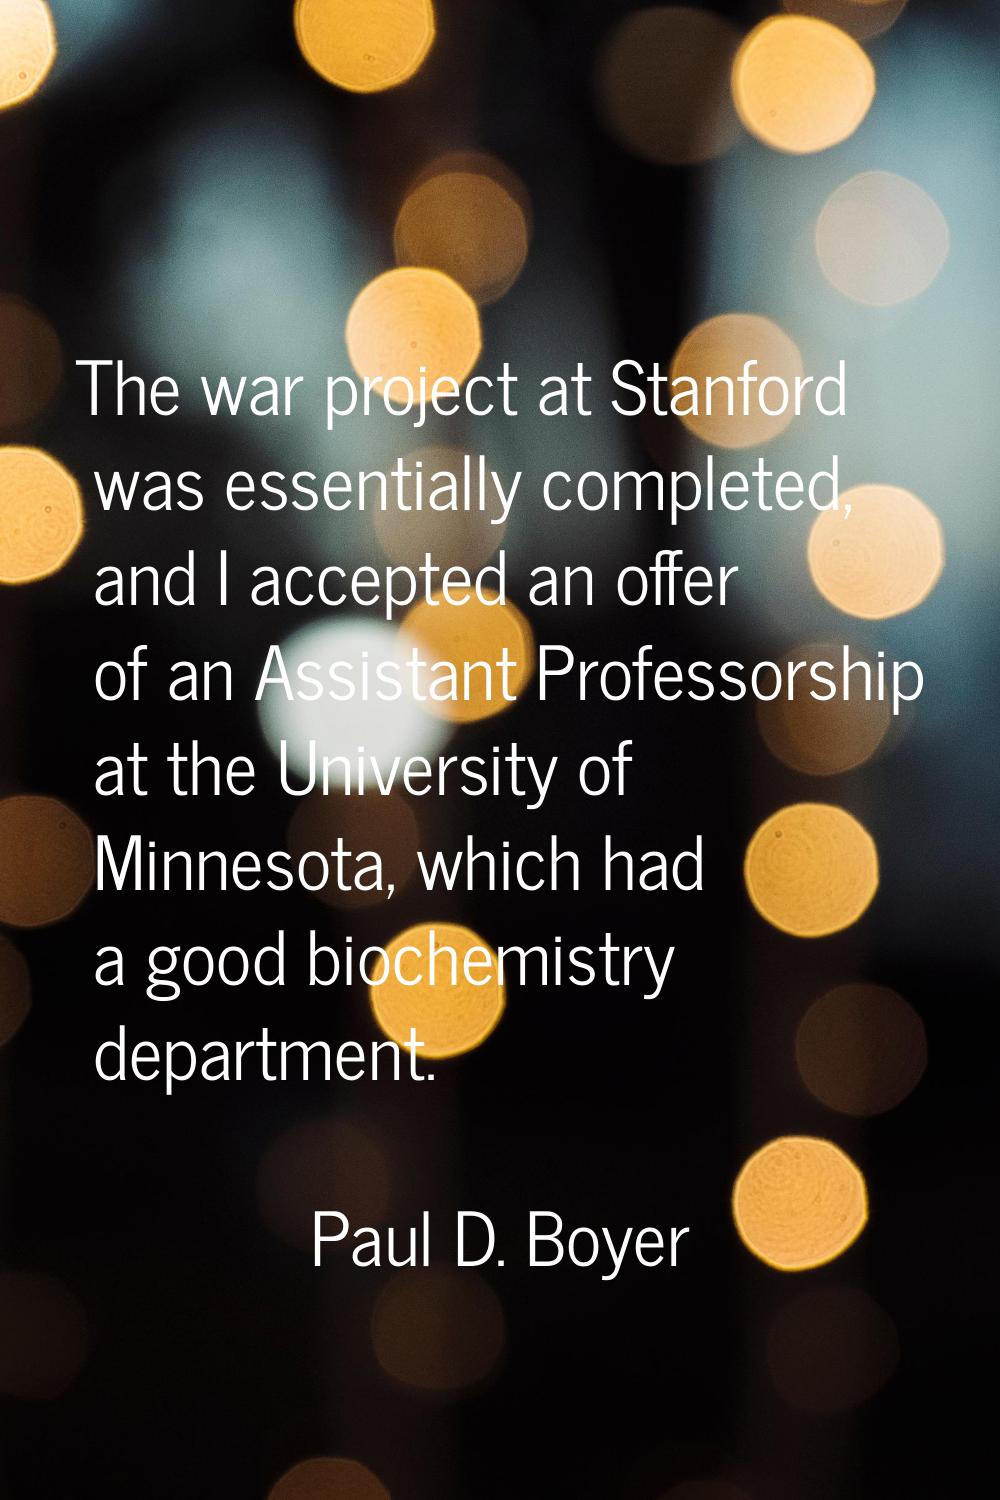 The war project at Stanford was essentially completed, and I accepted an offer of an Assistant Prof